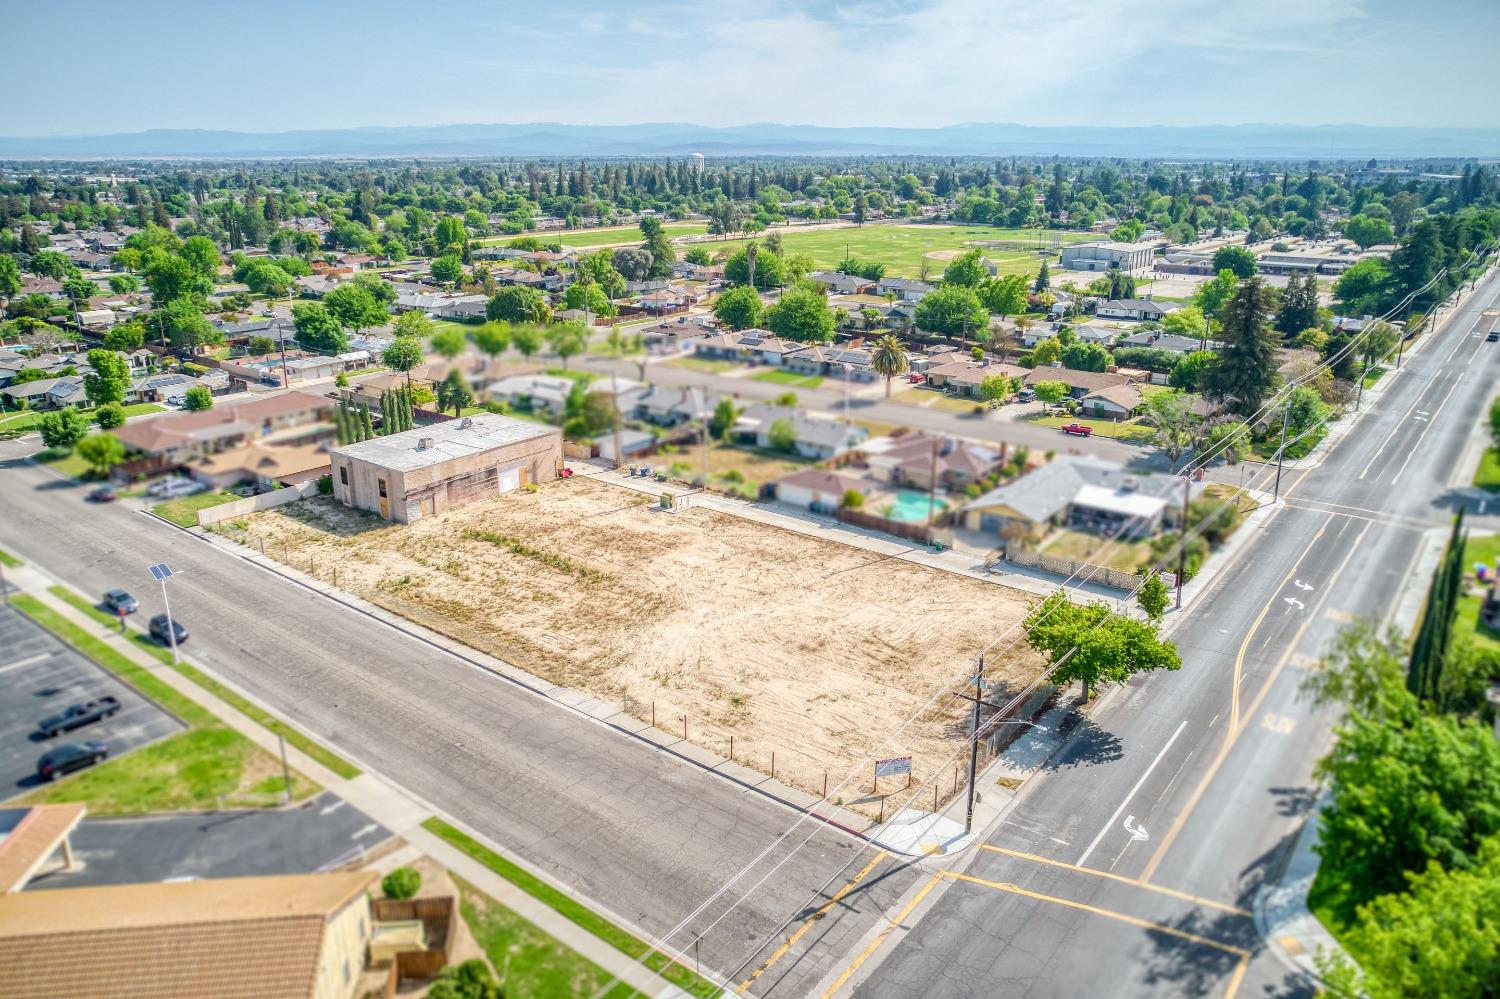 Photo of 1803 Sunset Ave in Madera, CA